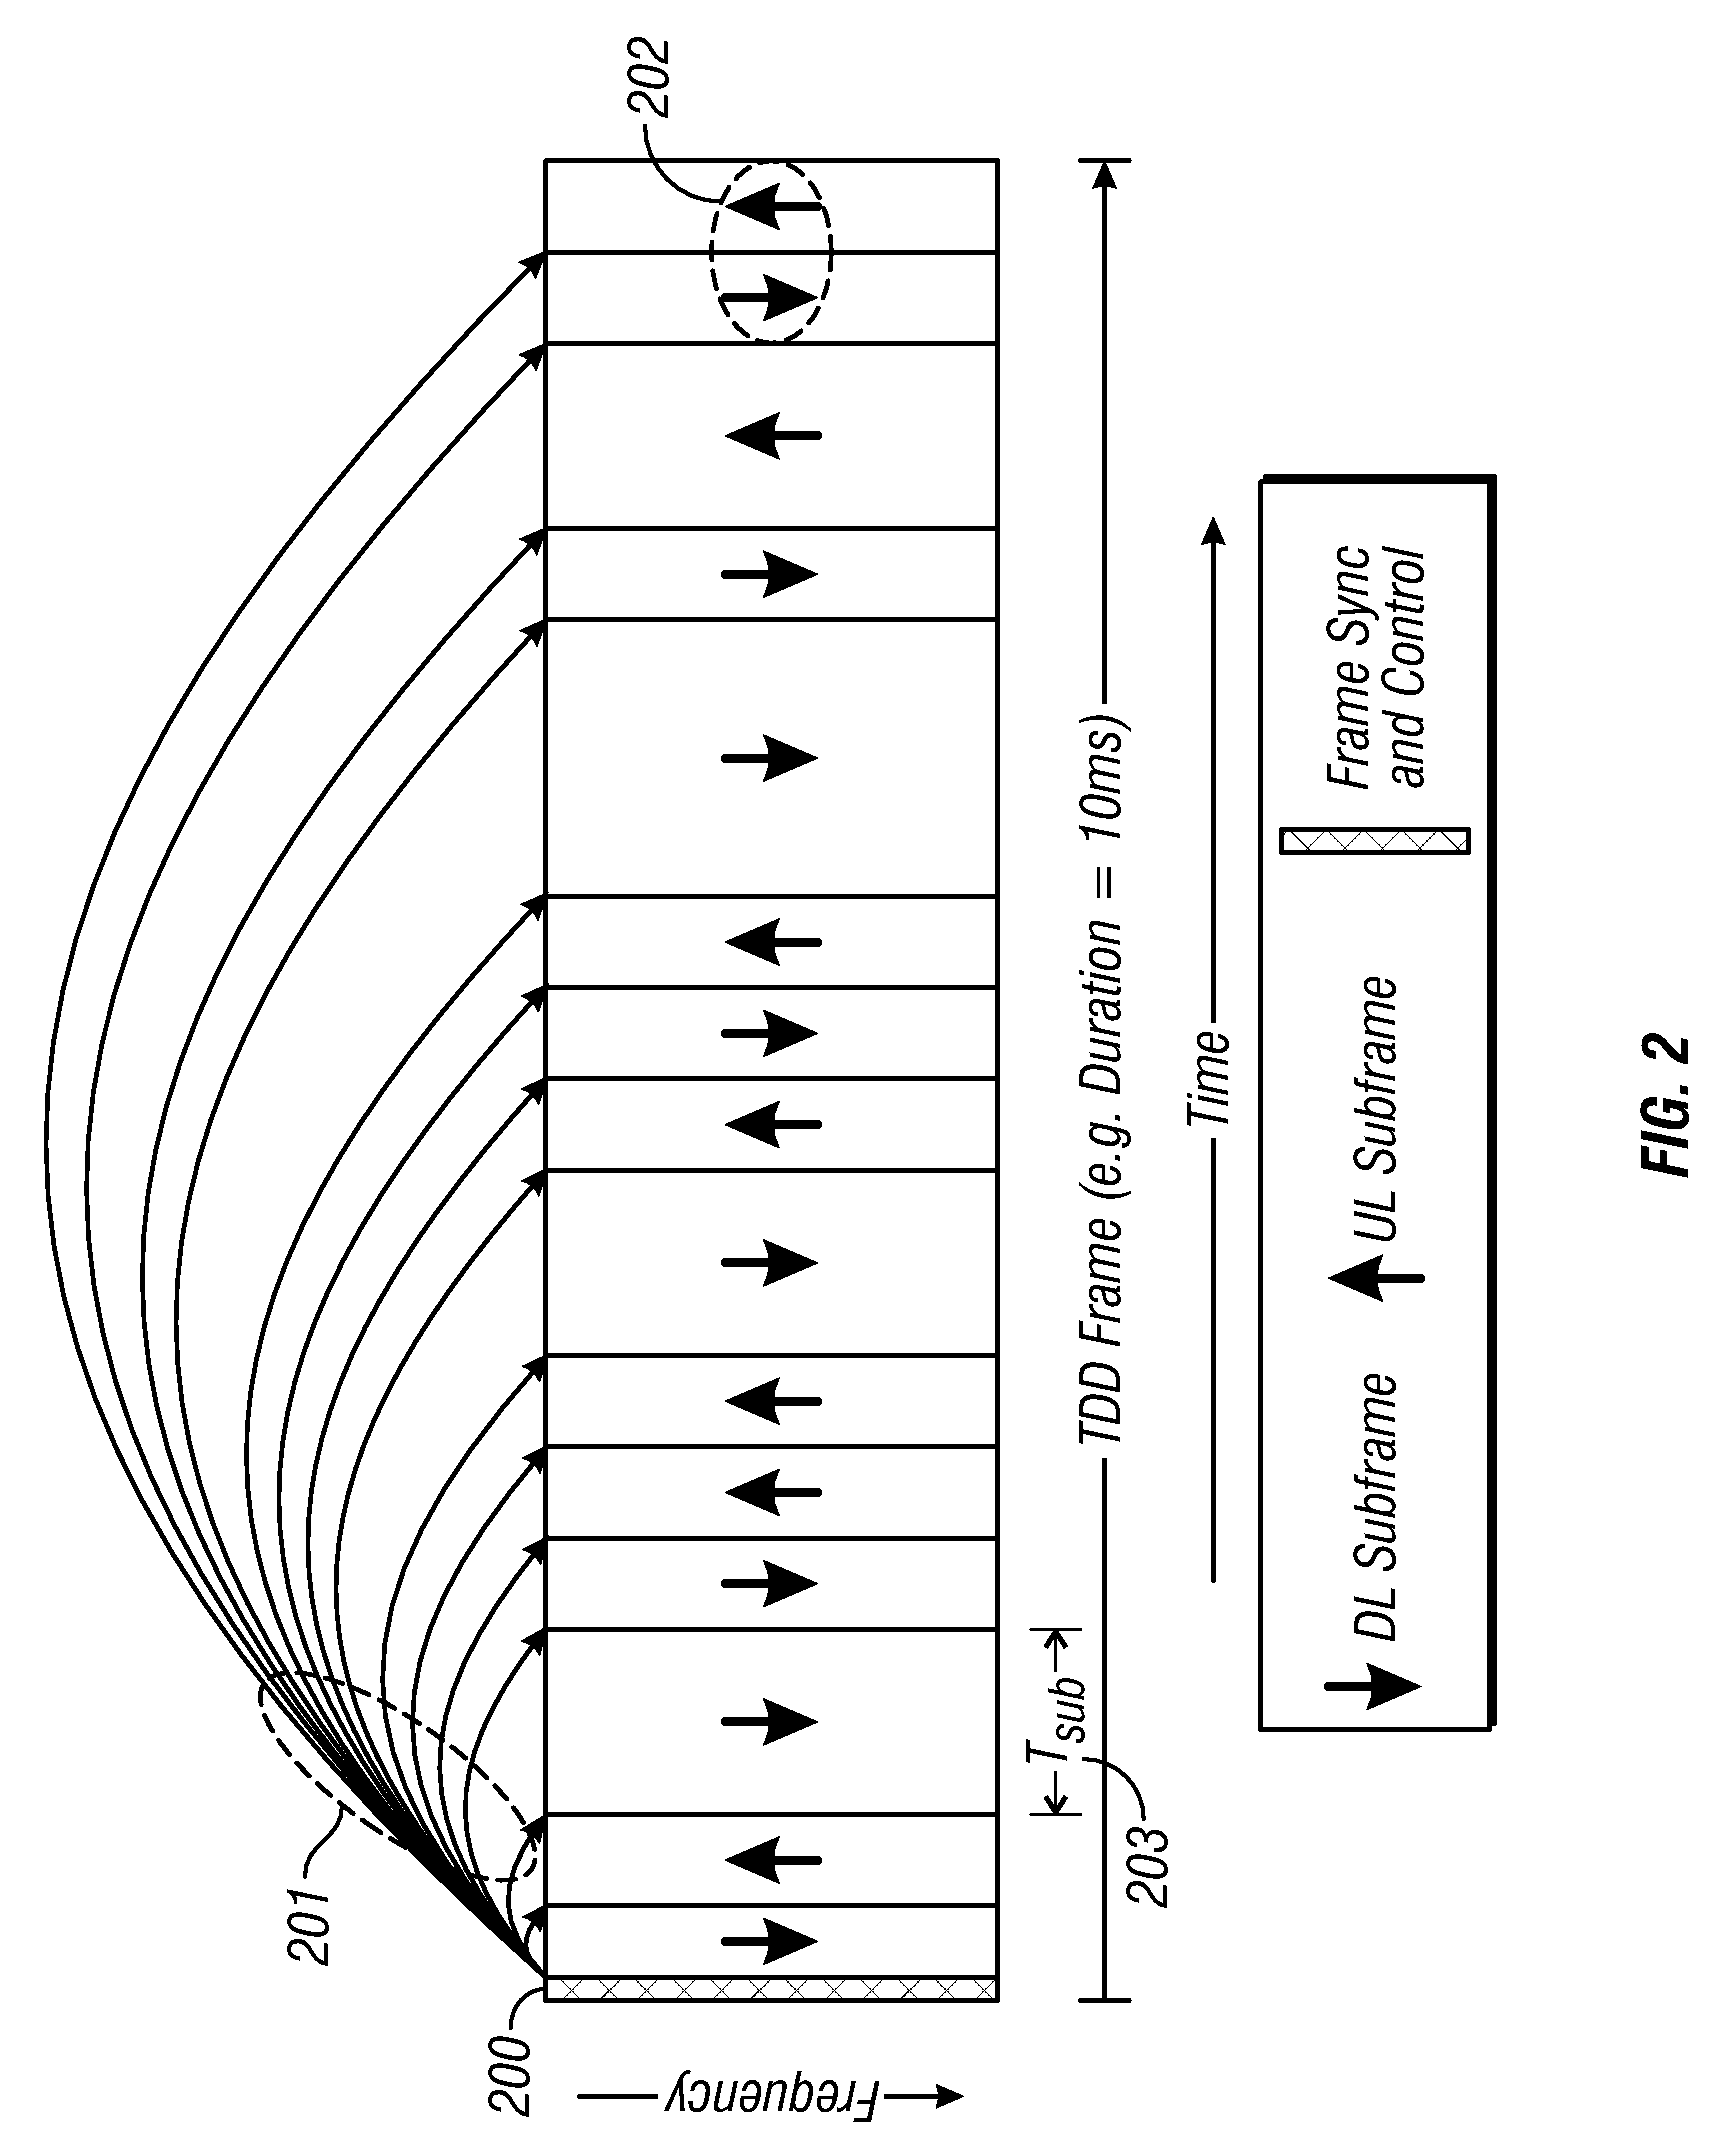 Flexible ofdm/ofdma frame structure for communication systems